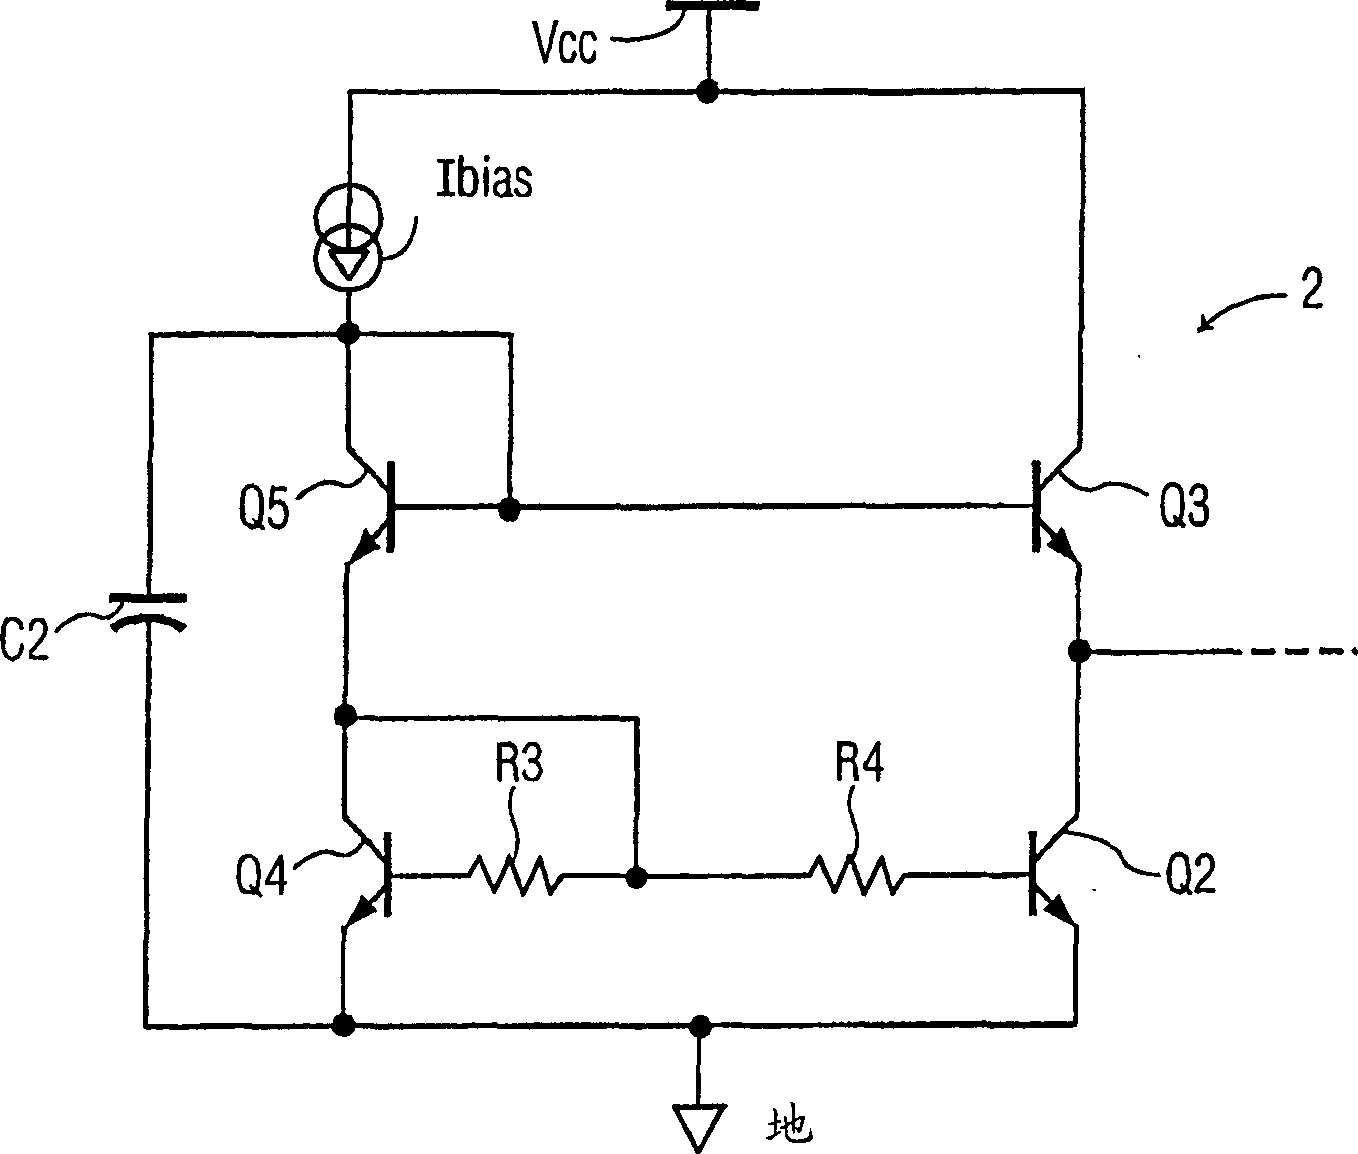 Power amplifier having a cascode current-mirror self-bias boosting circuit